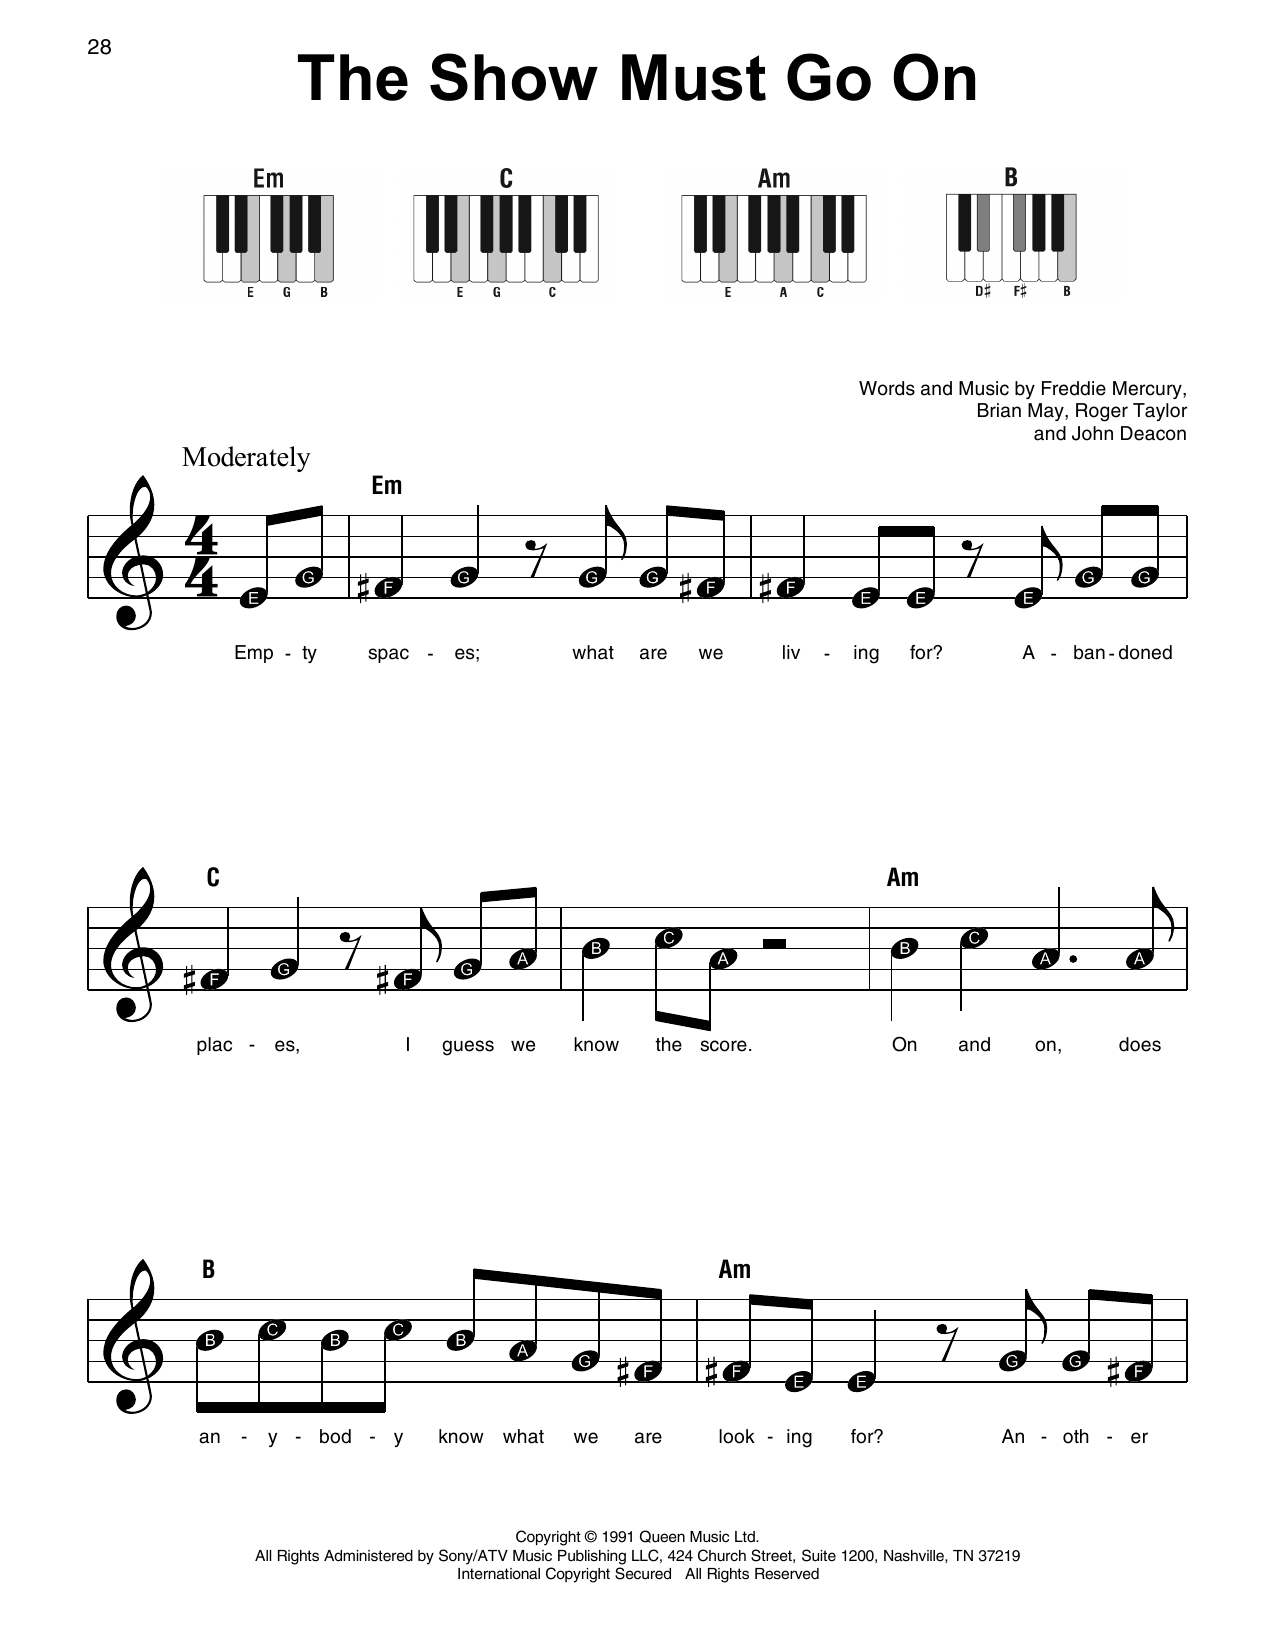 Download Queen The Show Must Go On Sheet Music